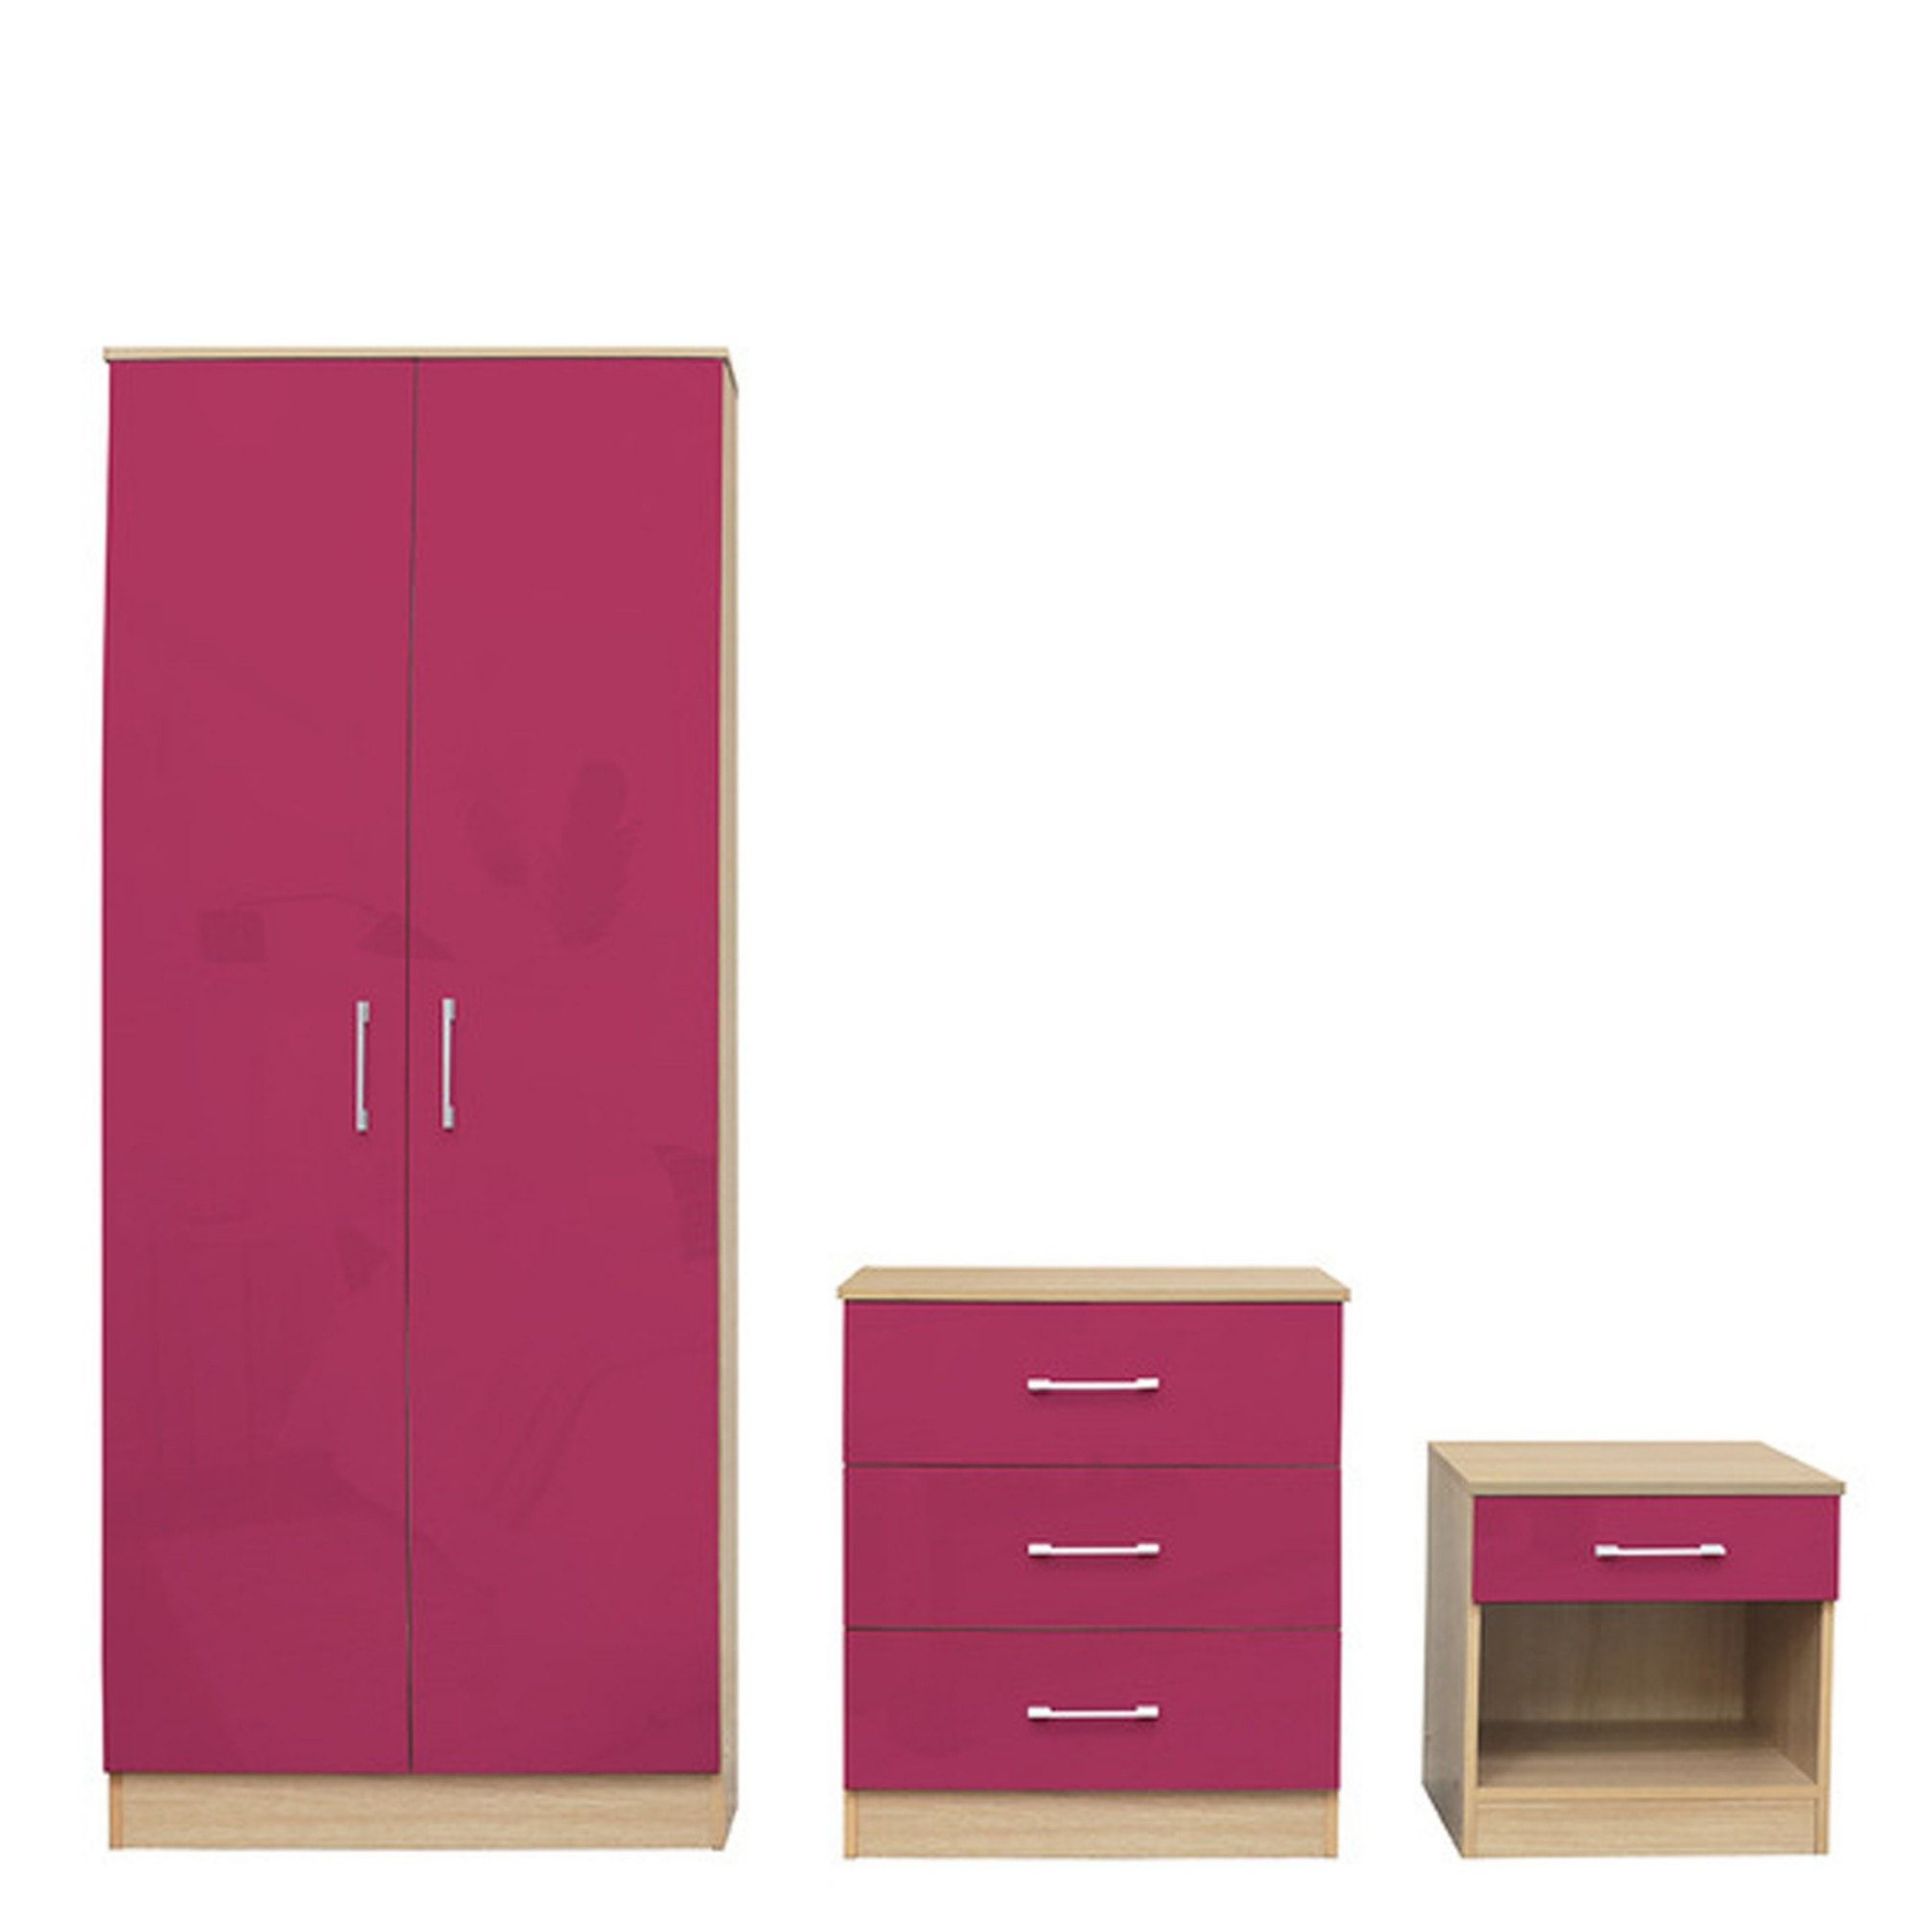 NEW BOXED 3 Piece Dakota Pink Bedroom Set. RRP £404.99. Made From MDF High Class Contemporary Style. - Image 2 of 2